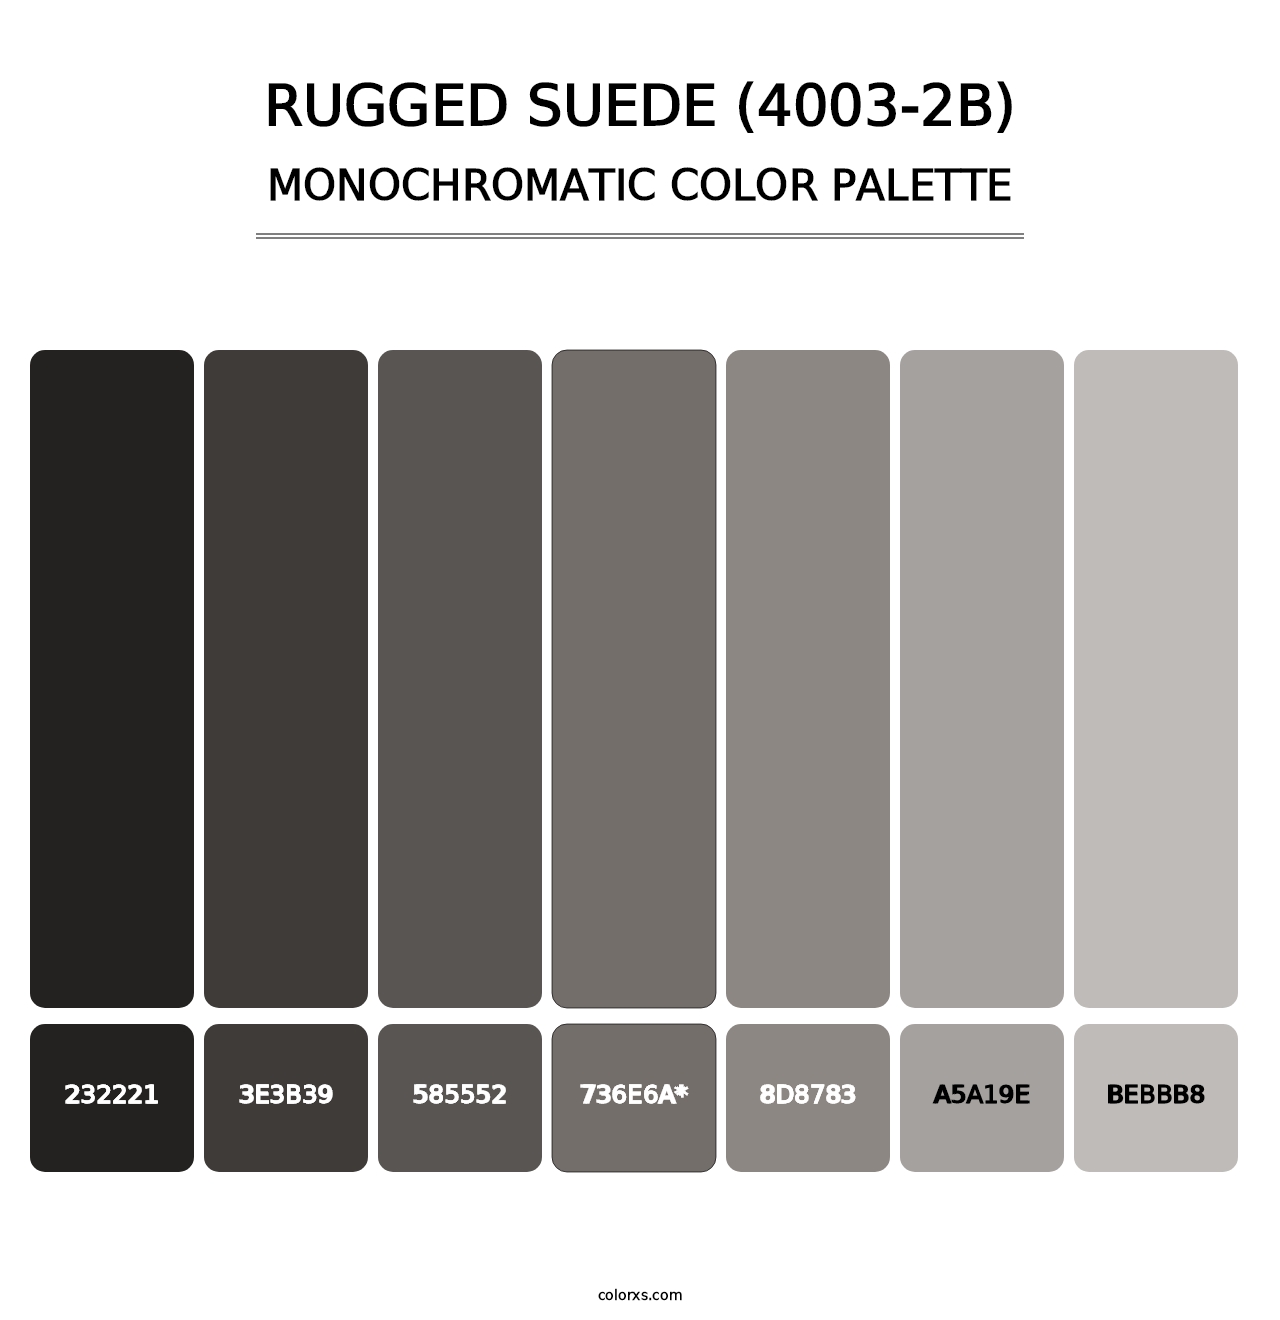 Rugged Suede (4003-2B) - Monochromatic Color Palette